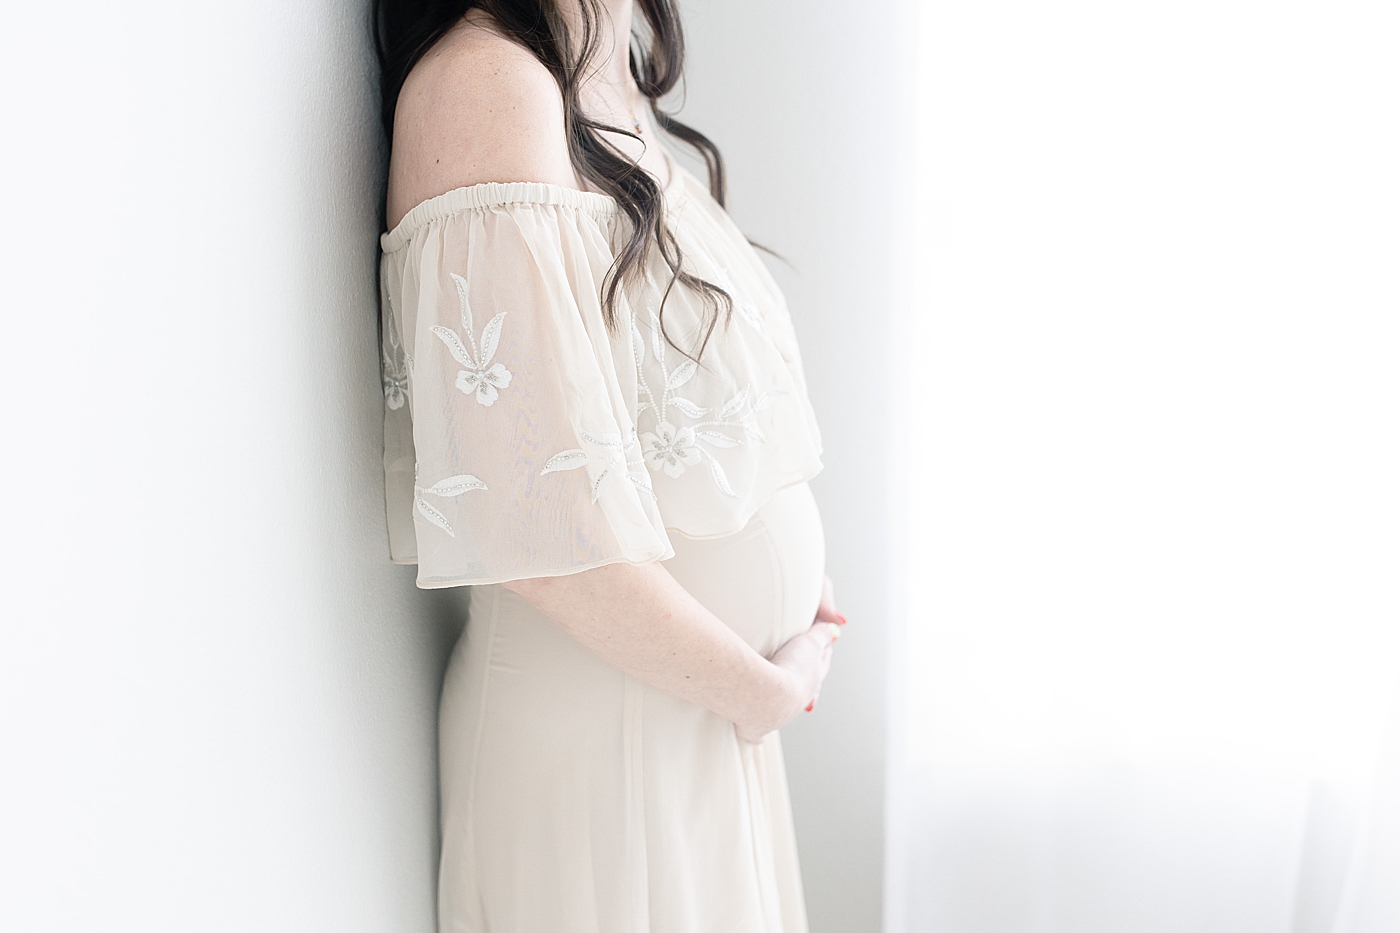 Pregnant mom wearing beautiful dress for maternity photos. Photo by Little Sunshine Photography.